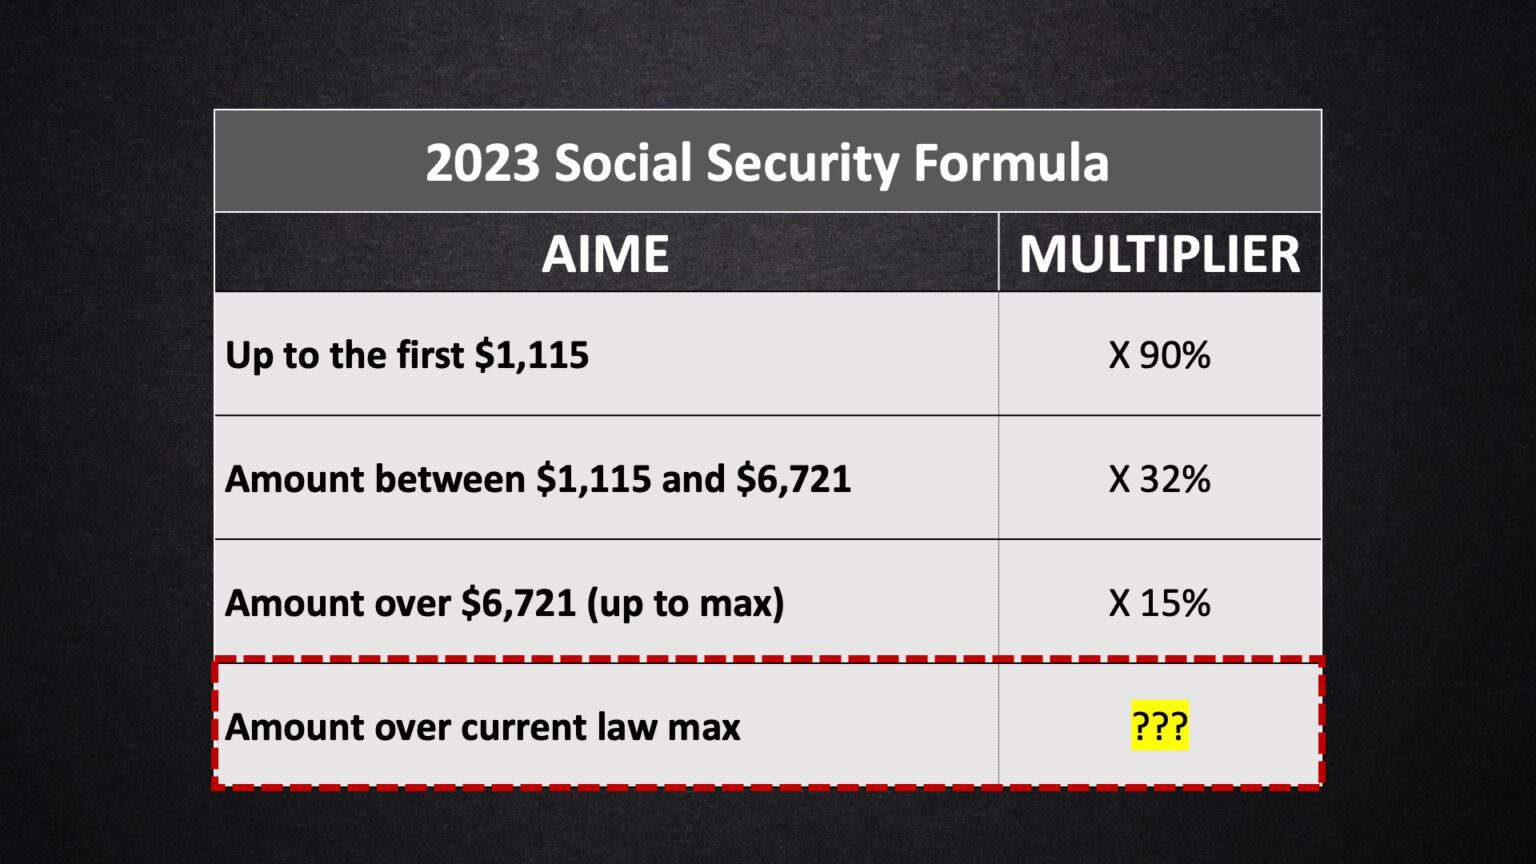 Should We Increase the Social Security Tax Limit?